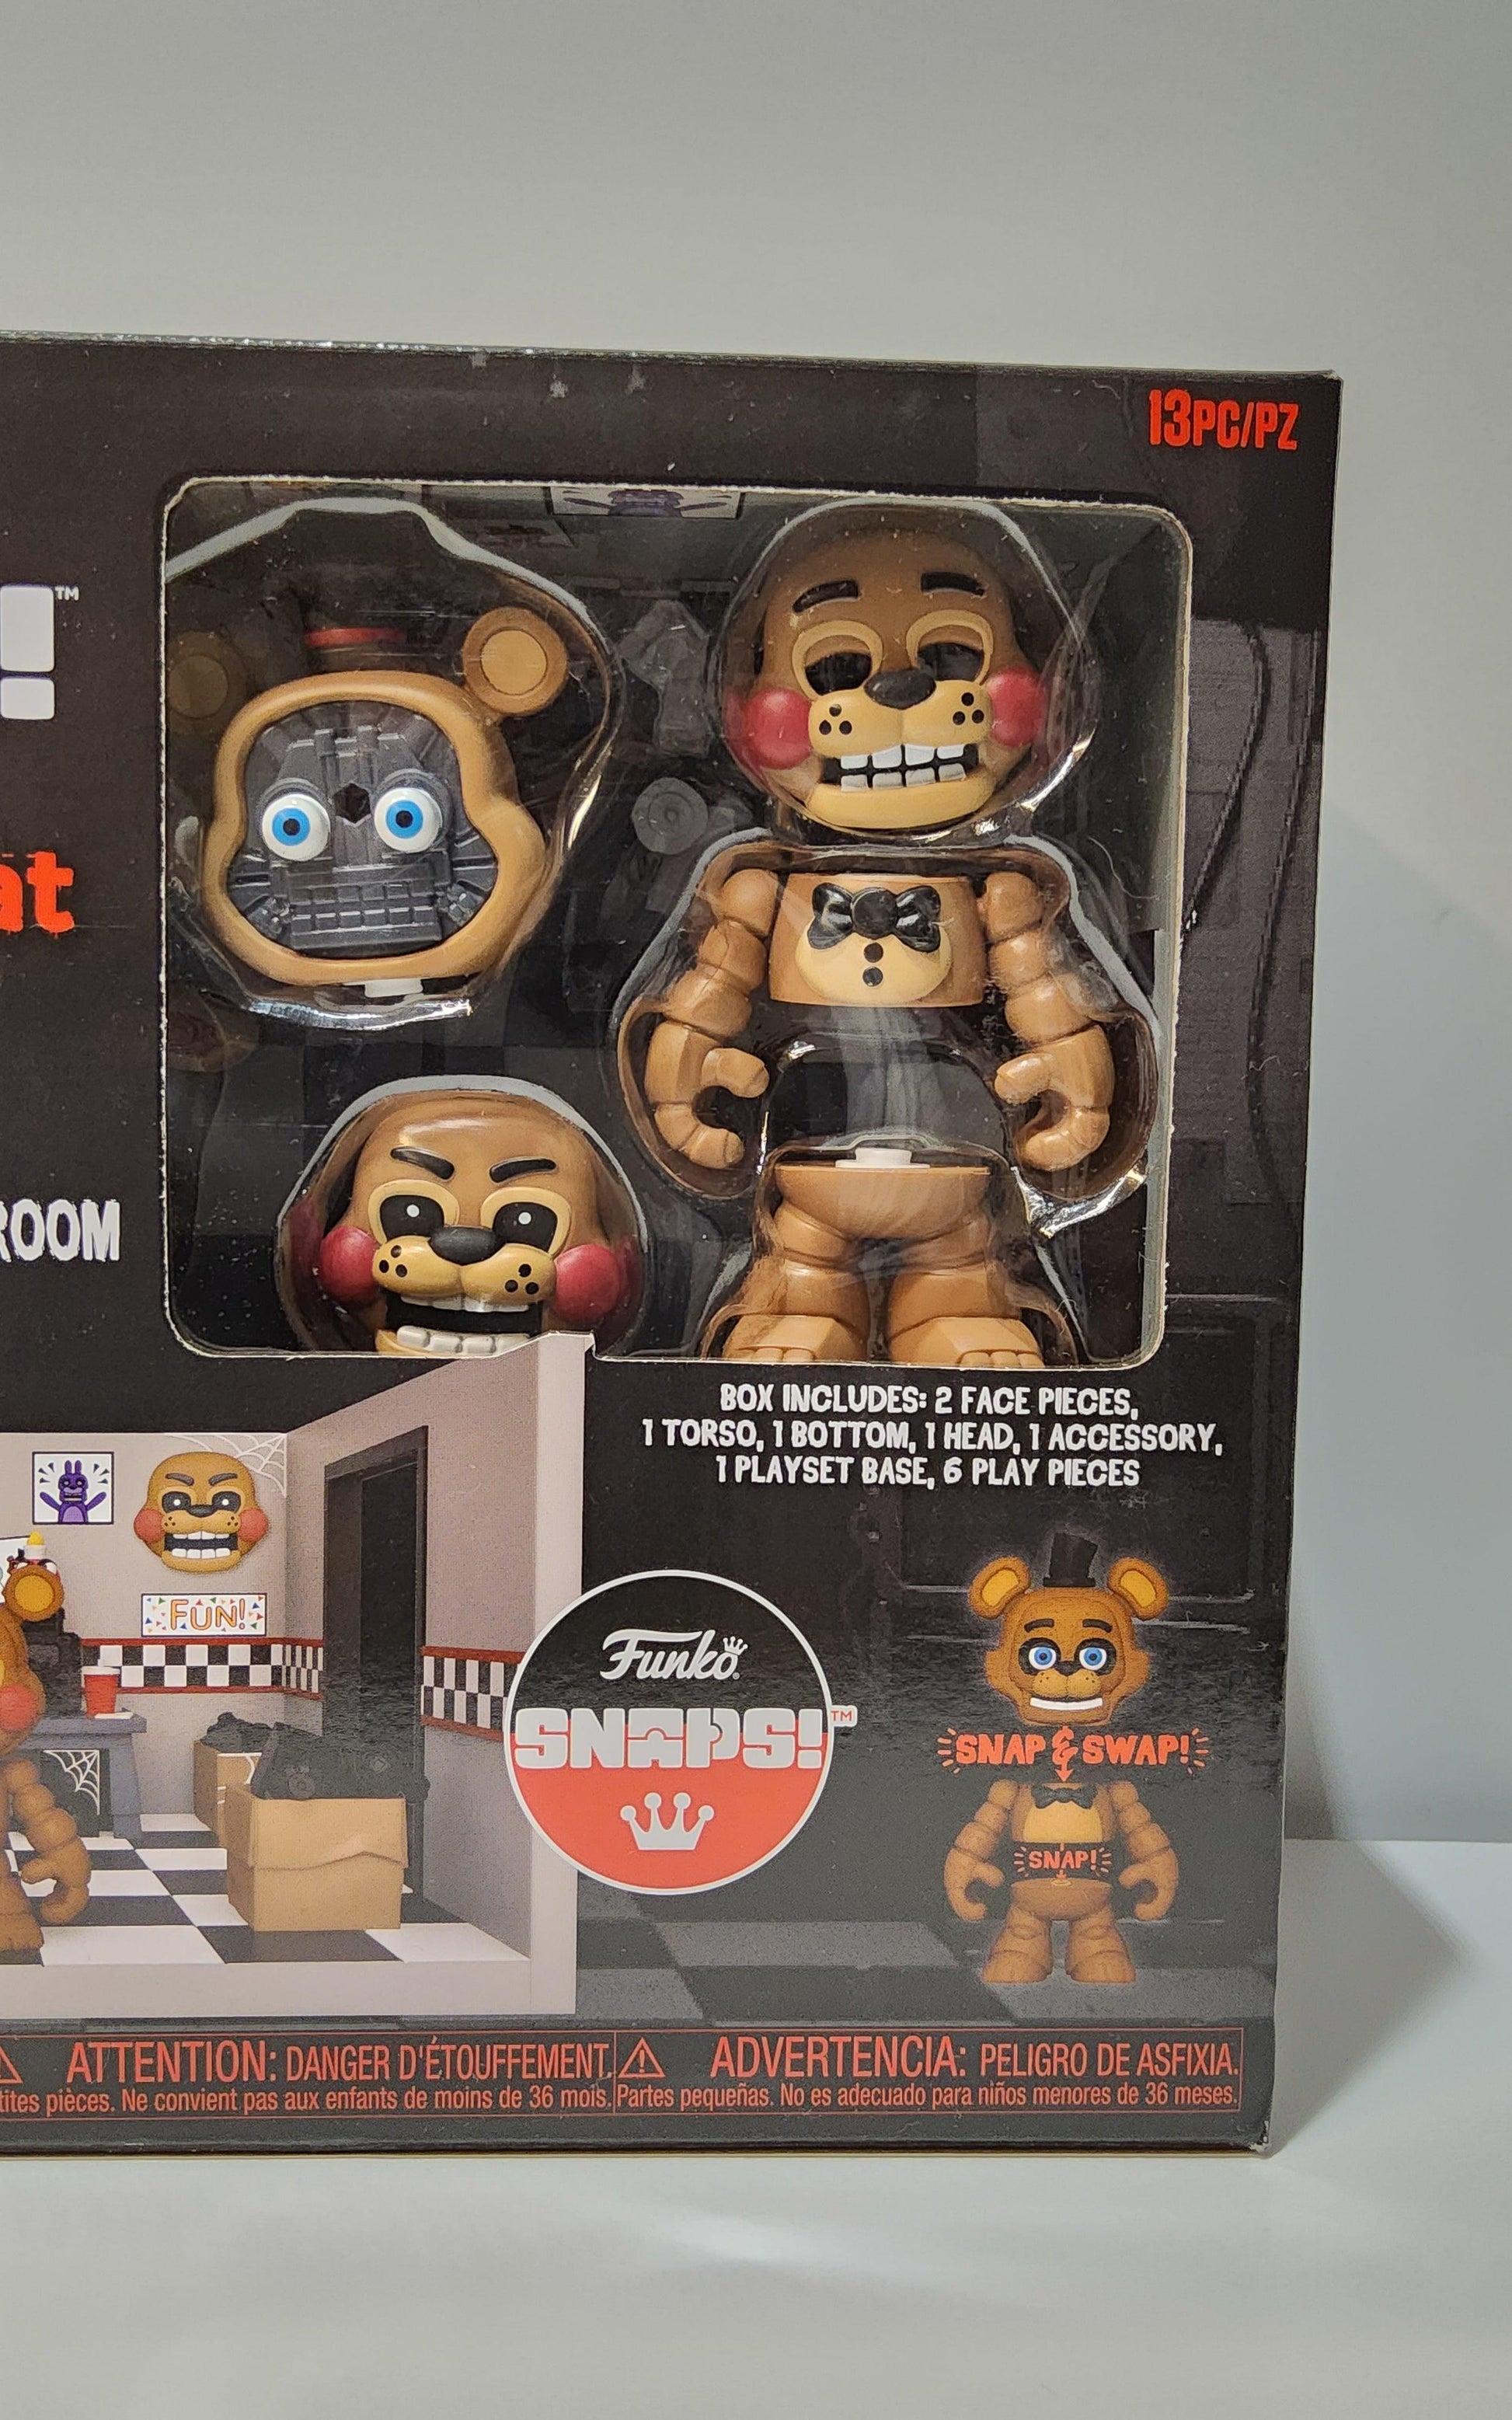 Funko Snaps! Five Nights at Freddy's FNAF Toy Freddy with Storage Room - Logan's Toy Chest